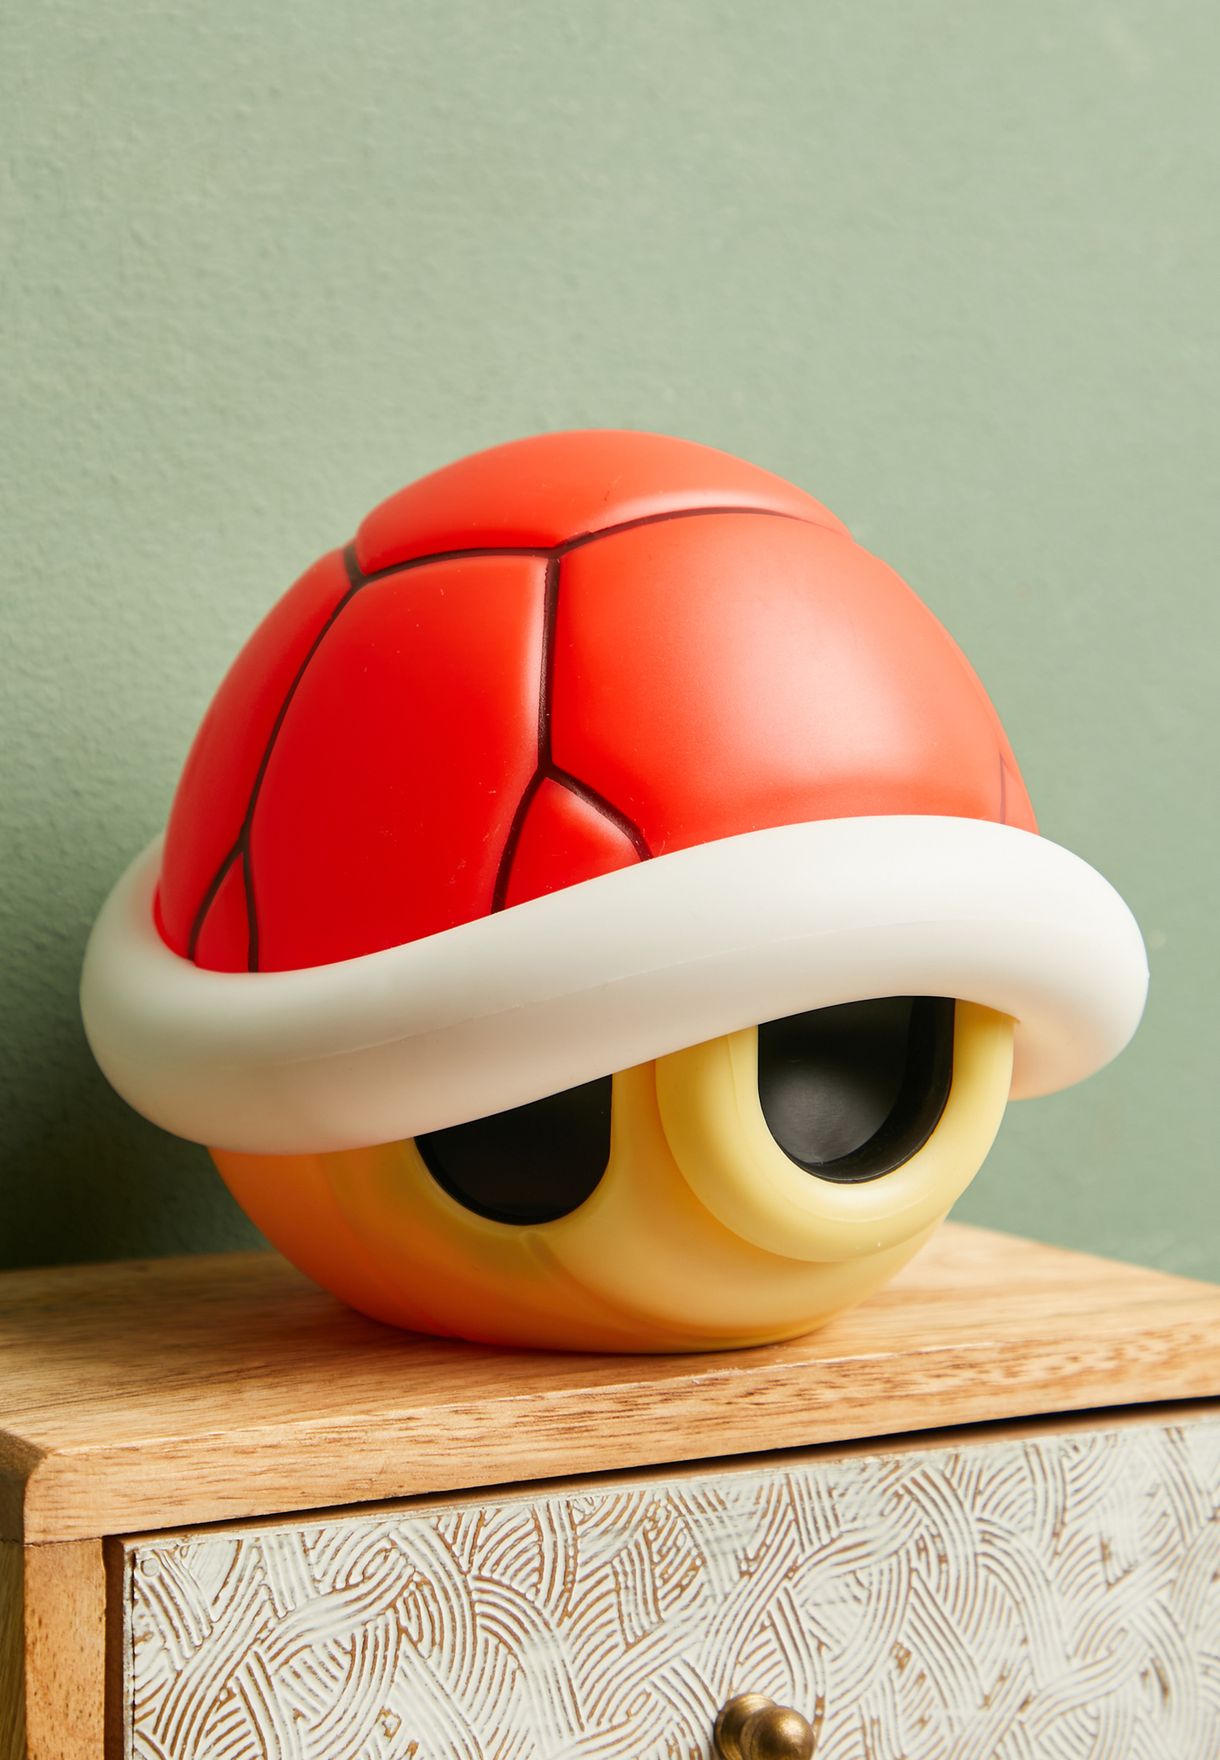 Super Mario Red Shell Light With Sound